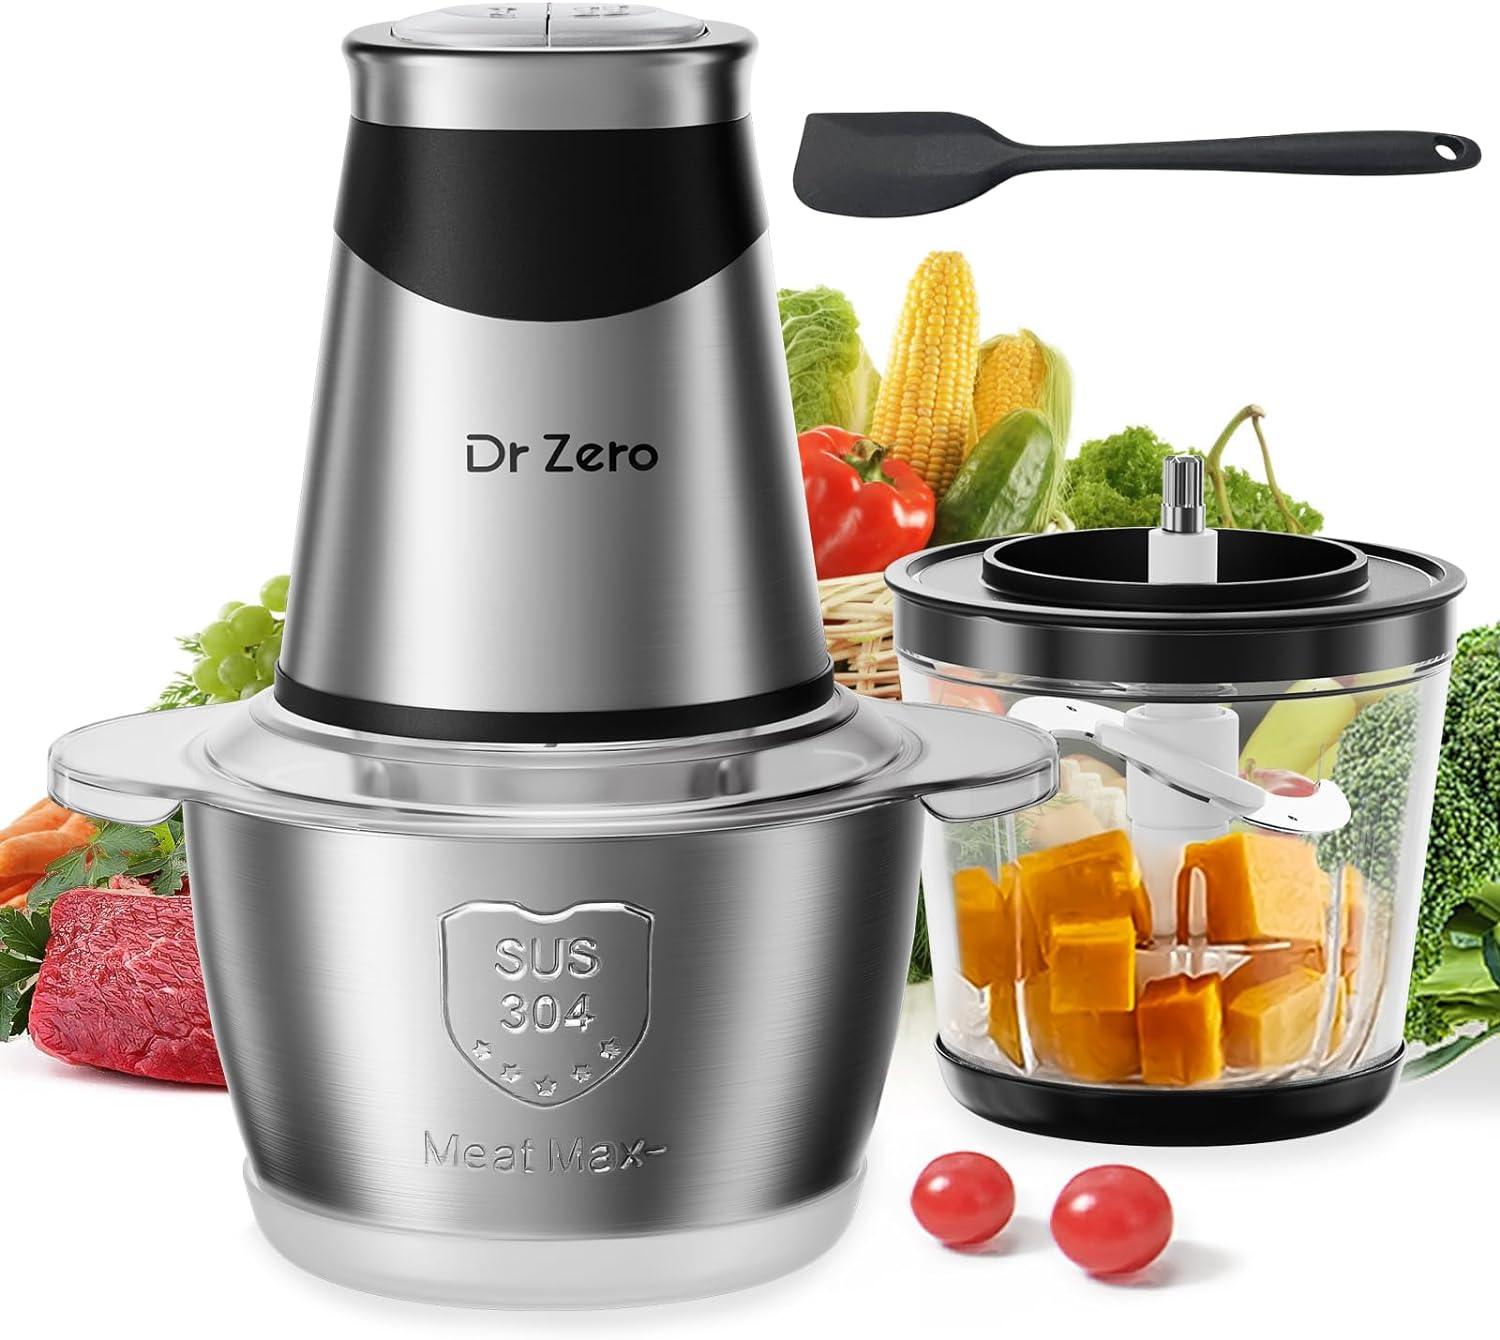 DR.ZERO Electric Chopper with 2 Mixing Containers, 500 W Multi Chopper 1.2 L & 0.6 L, 2 Speed Levels, 4 Stainless Steel Knives, Universal Chopper for Meat, Onions, Baby Food, Fruit, Vegetables
